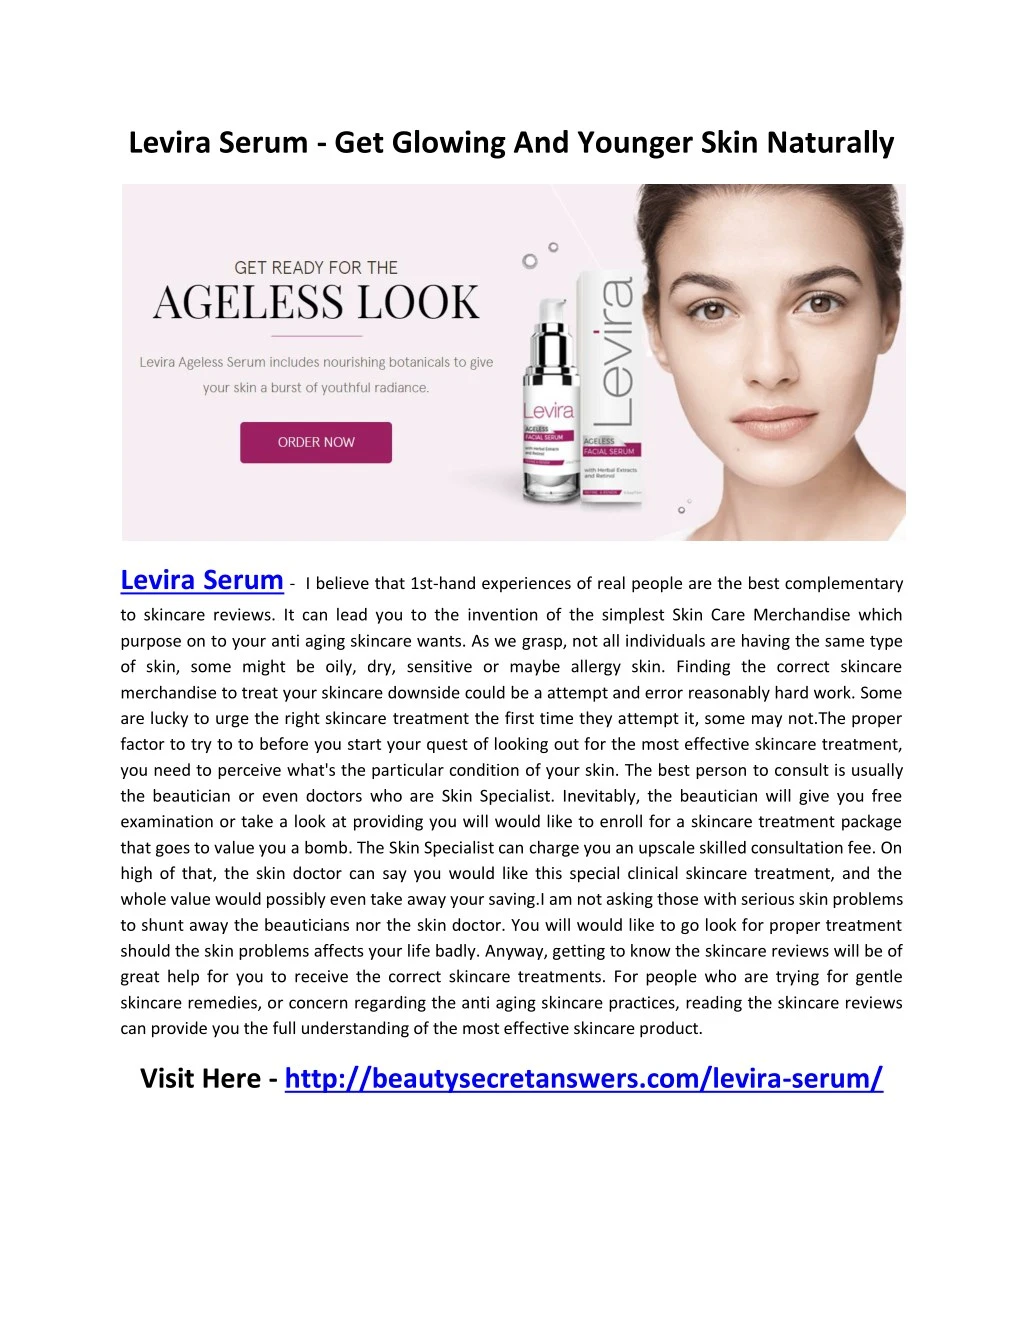 levira serum get glowing and younger skin